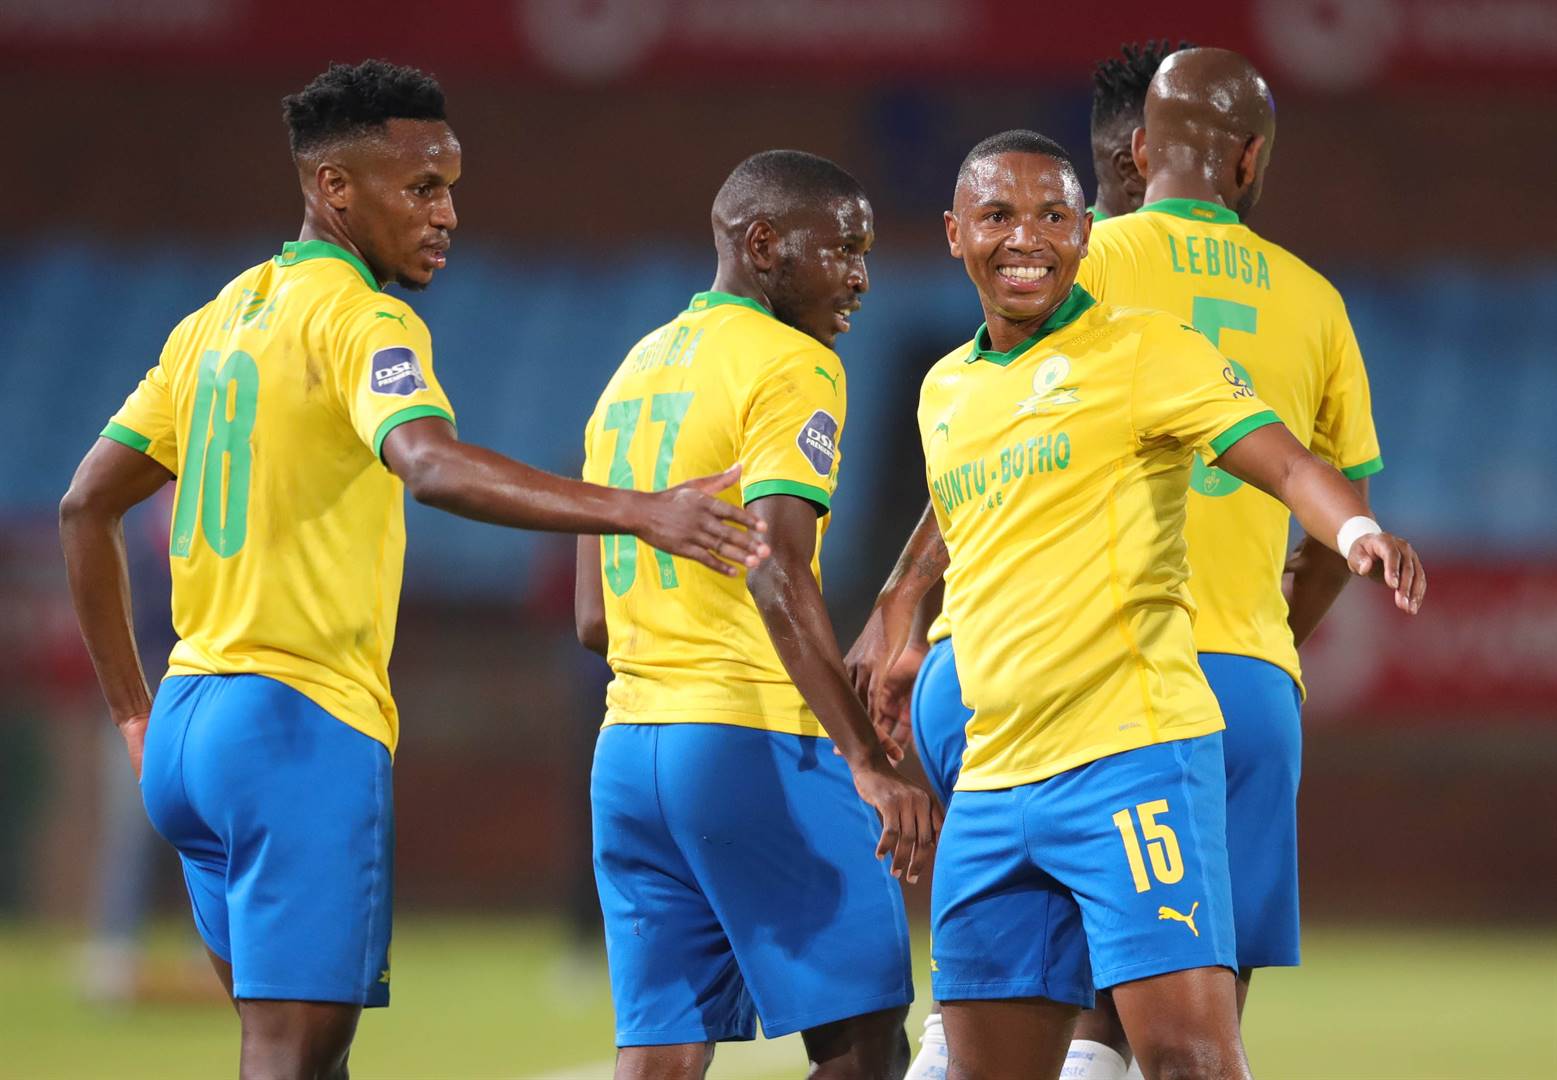 Aubrey Modiba celebrates a goal with teammates as Sundowns beat SuperSport United at Loftus Versfeld to clinch the league with three more games left this season. Photo: Samuel Shivambu/BackpagePix/Gallo Images